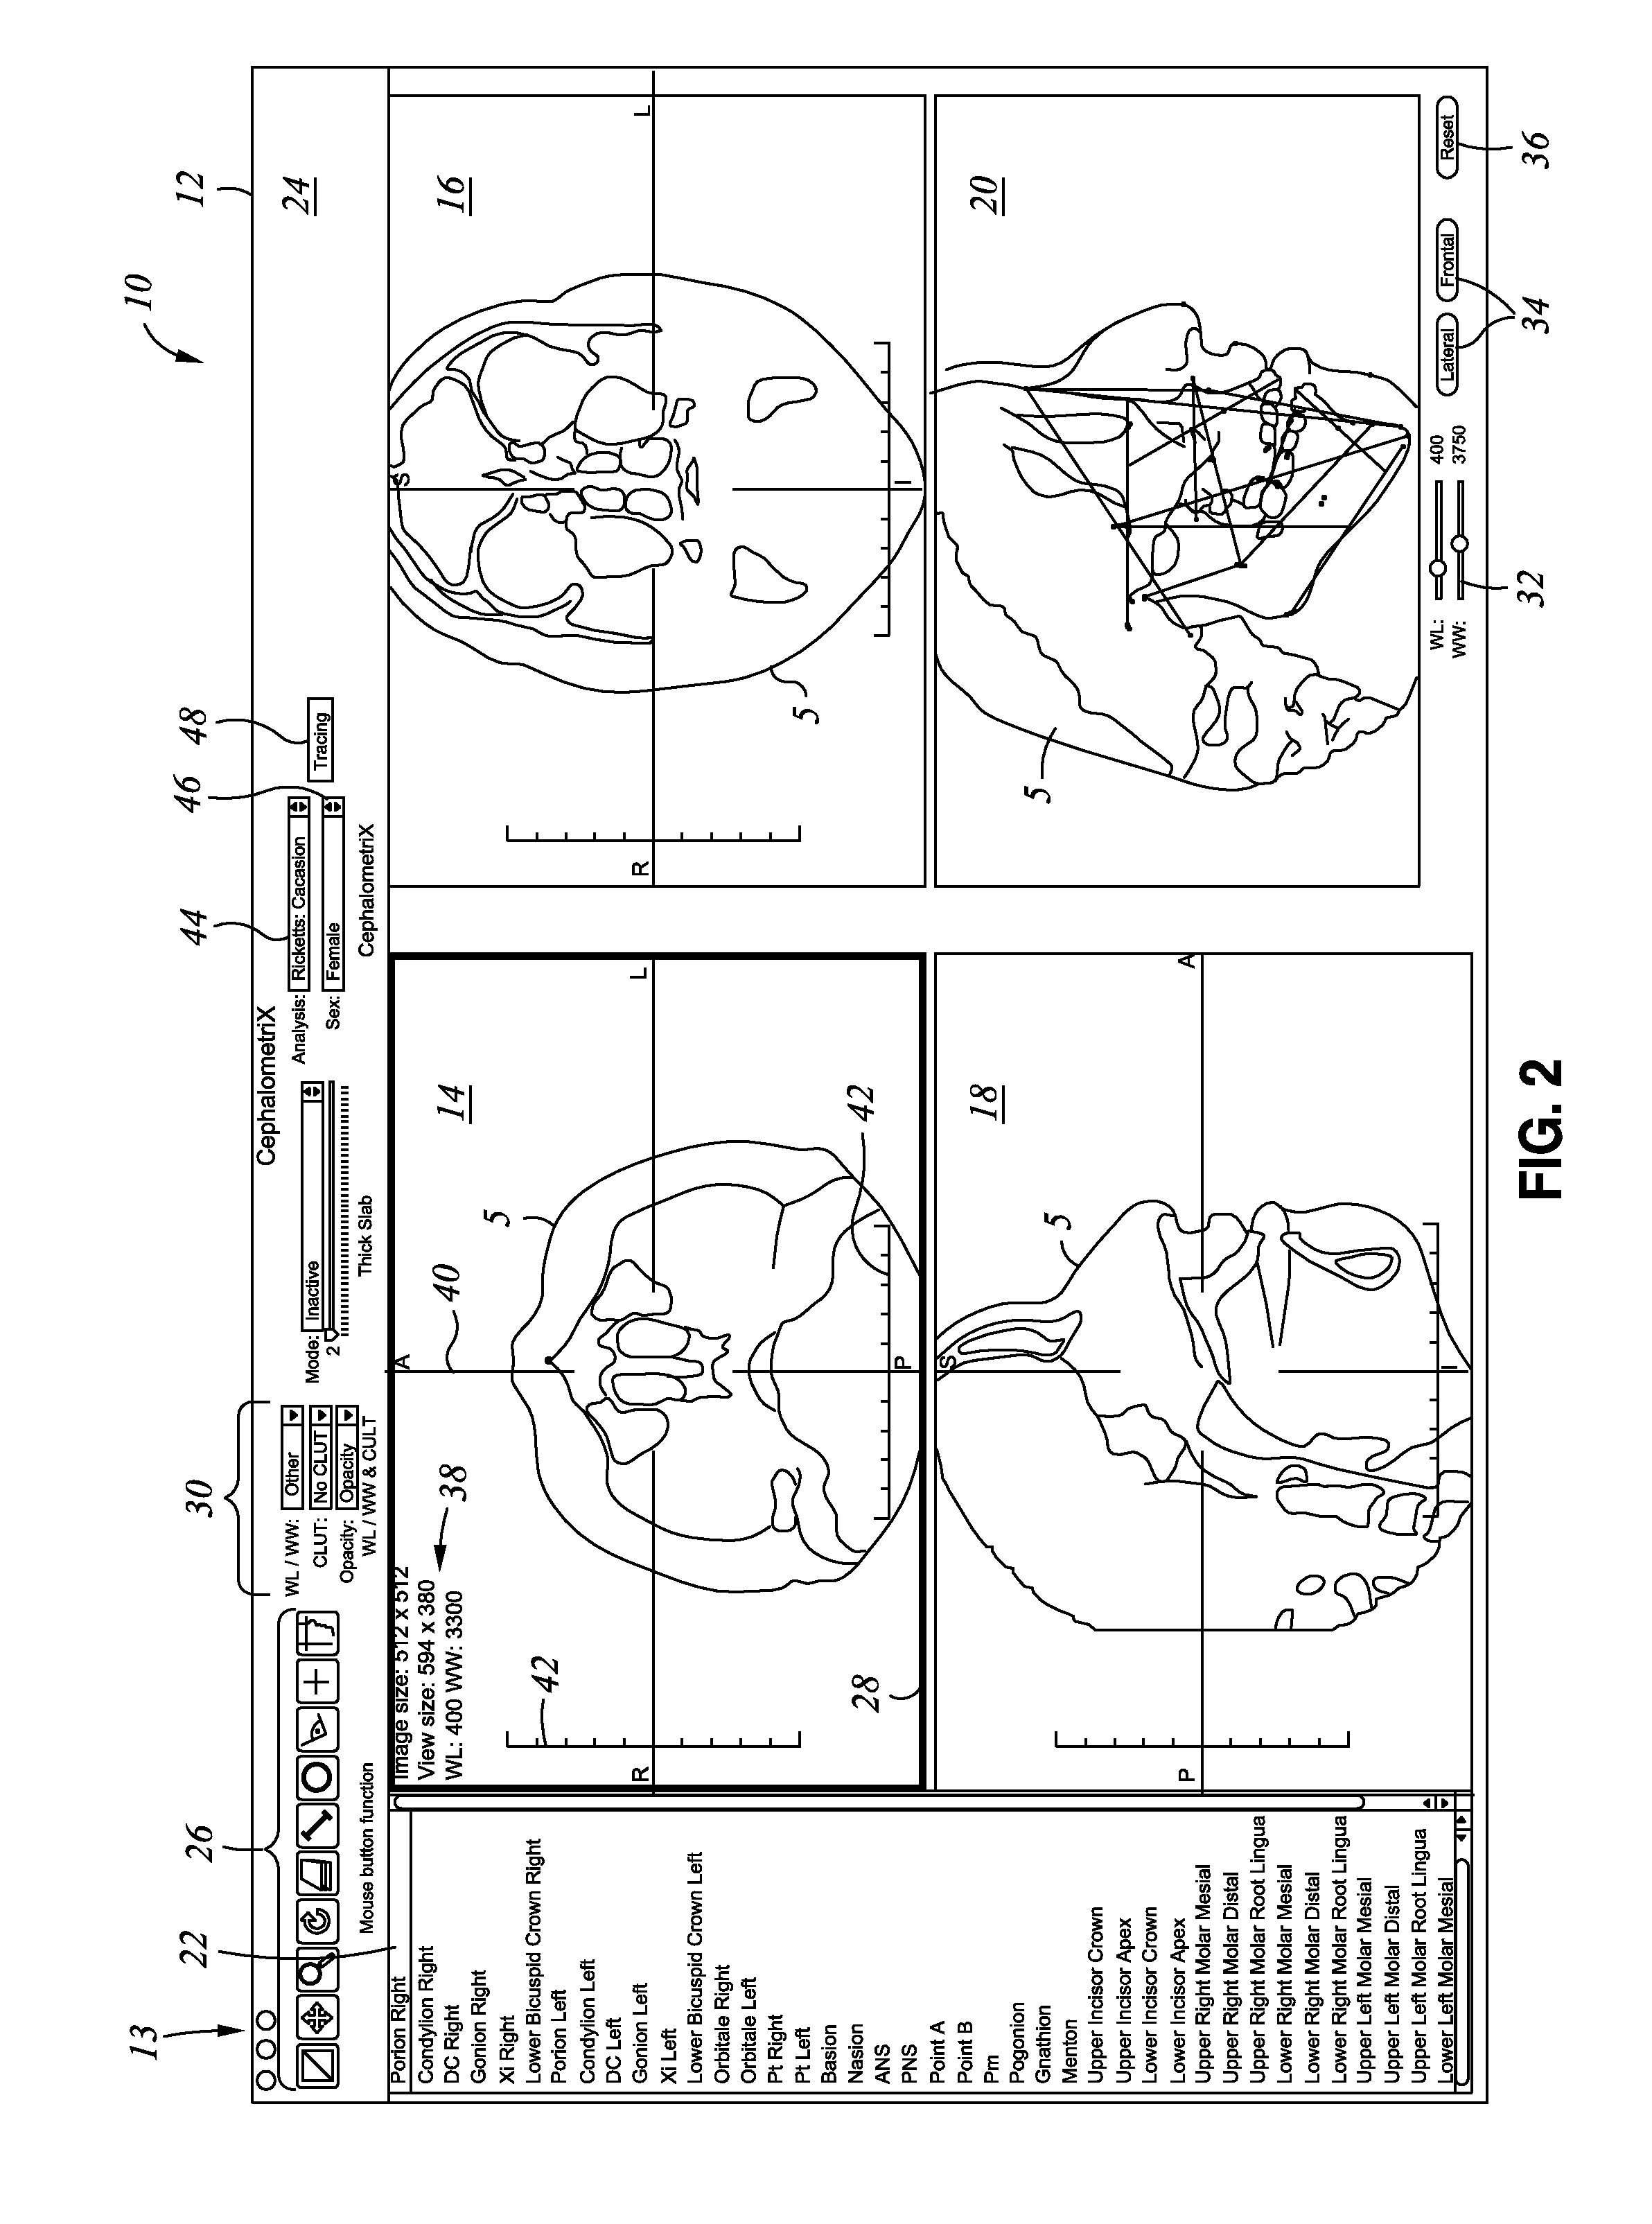 Method and system for orthodontic diagnosis